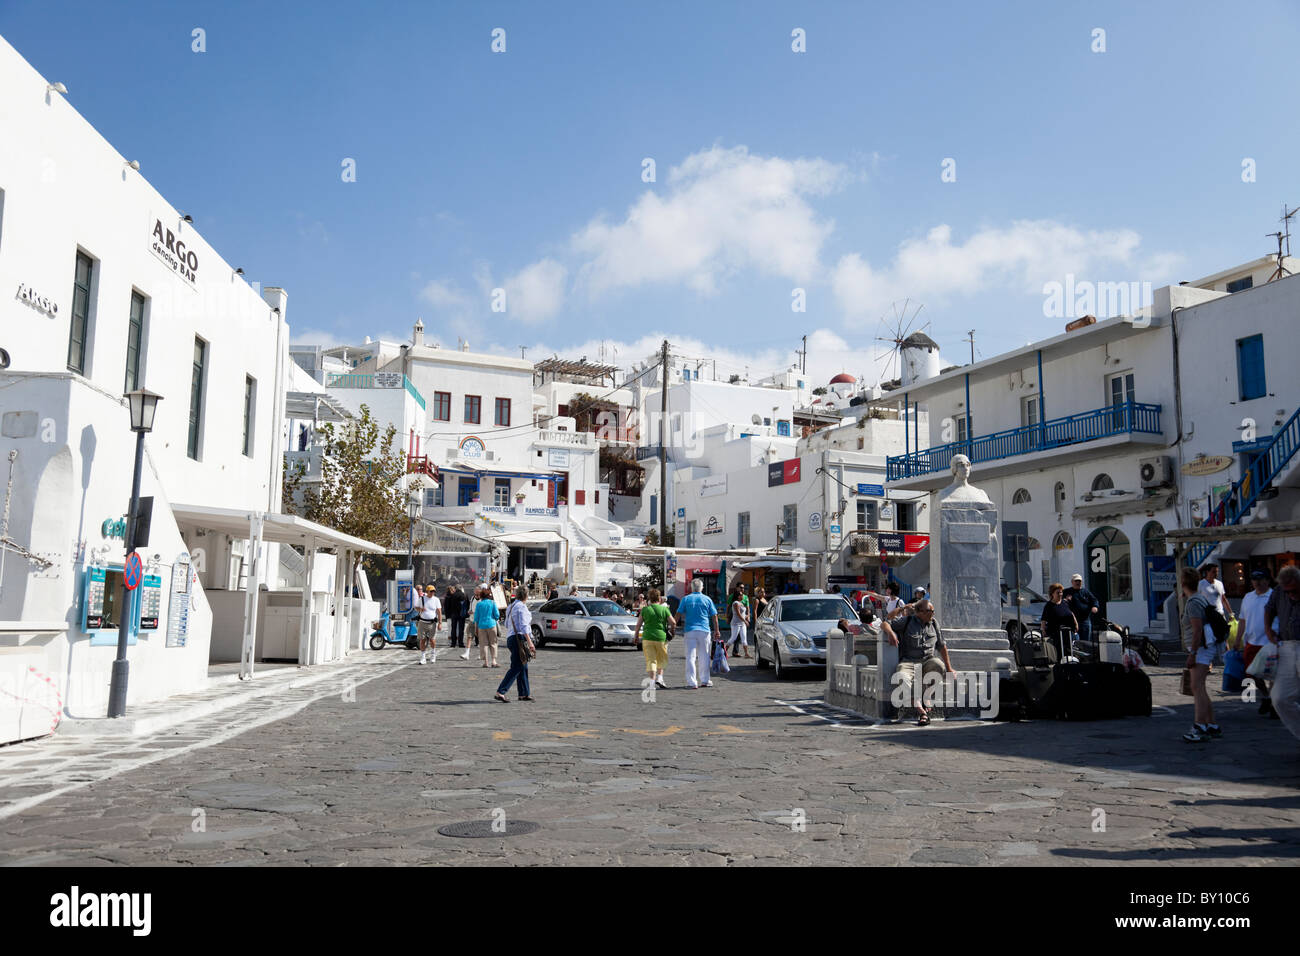 Mykonos town square with bustling shoppers. Stock Photo